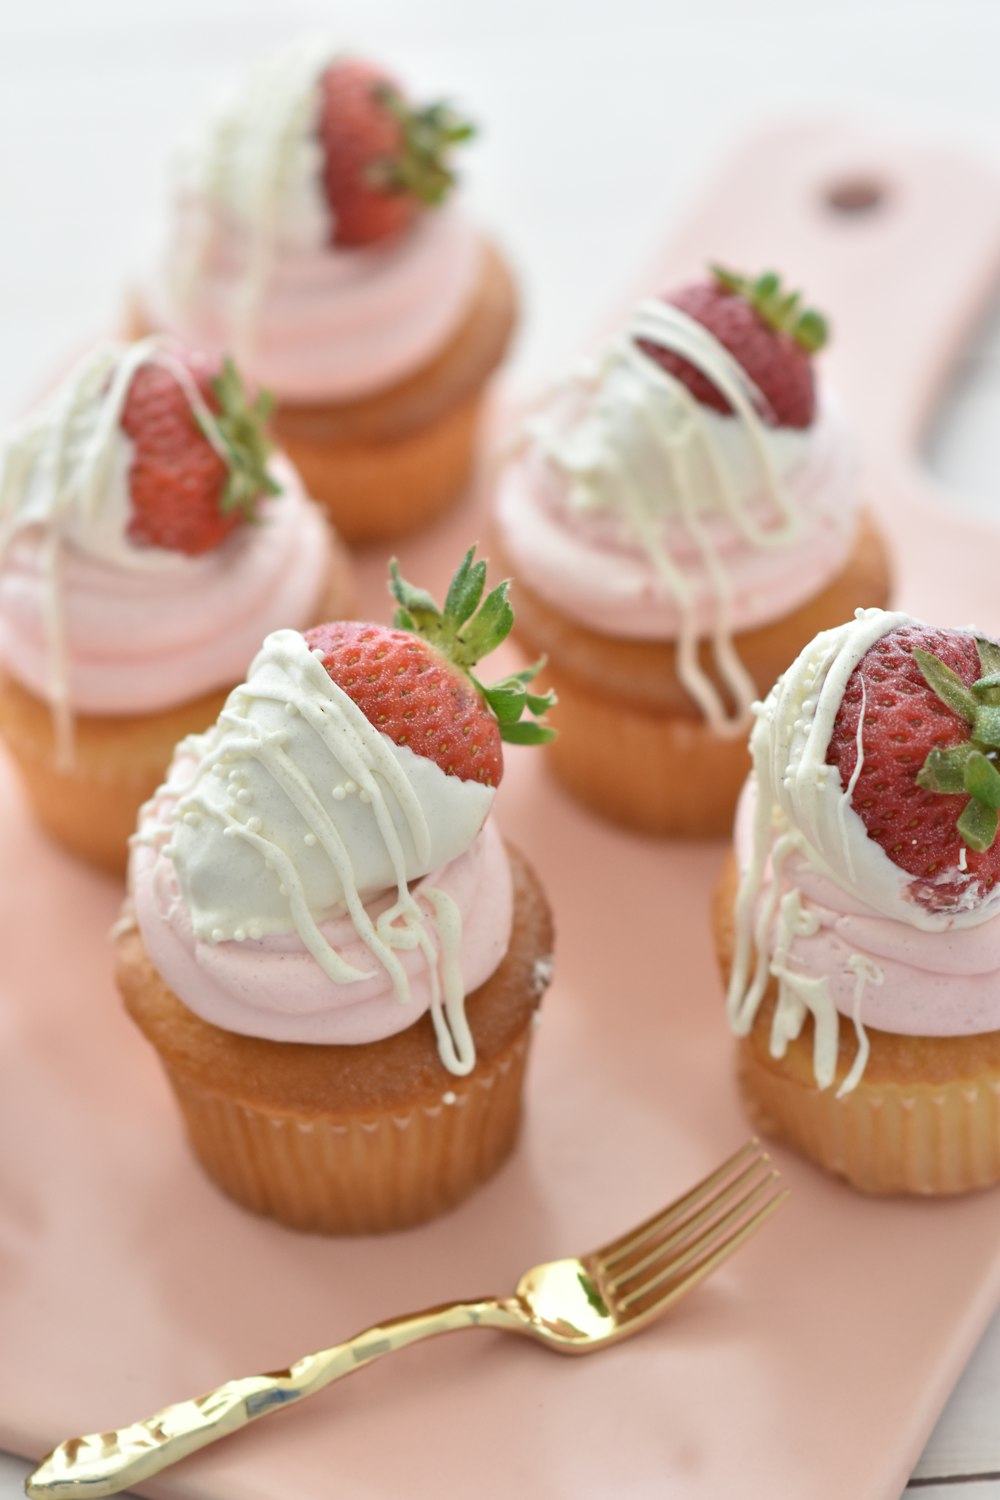 selective focus photography of cupcakes with icings